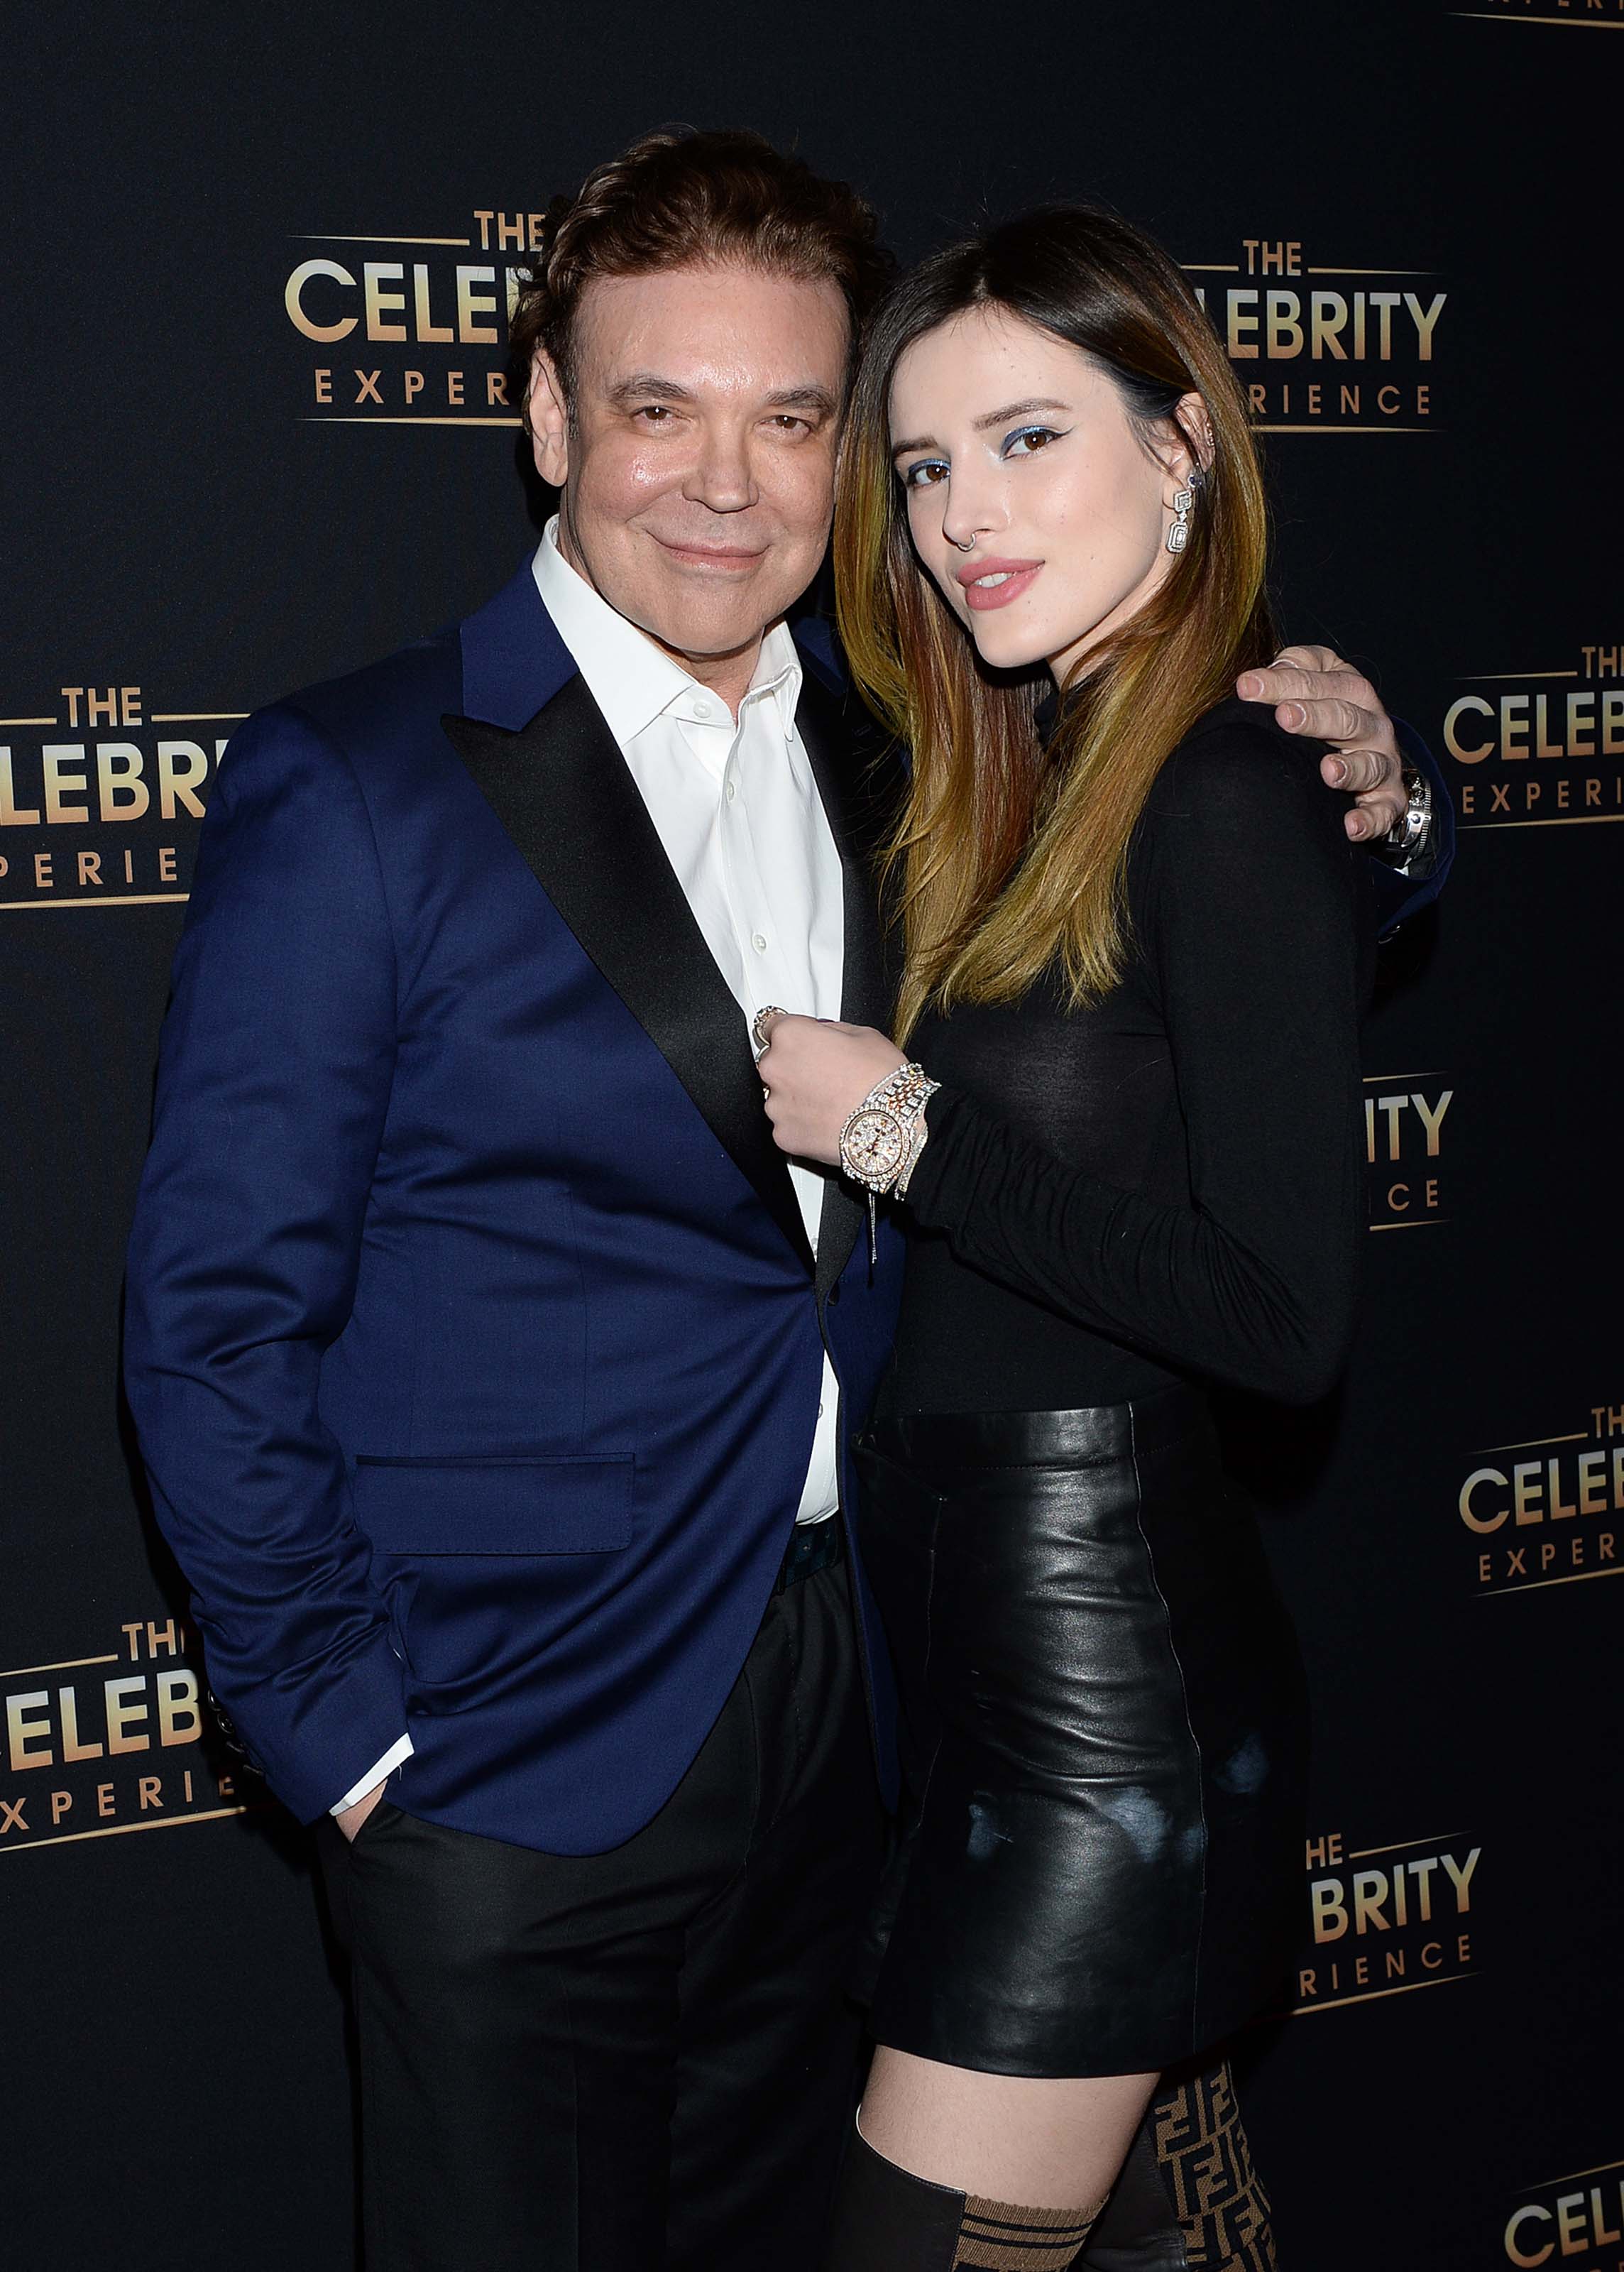 Bella Thorne attends The Celebrity Experience